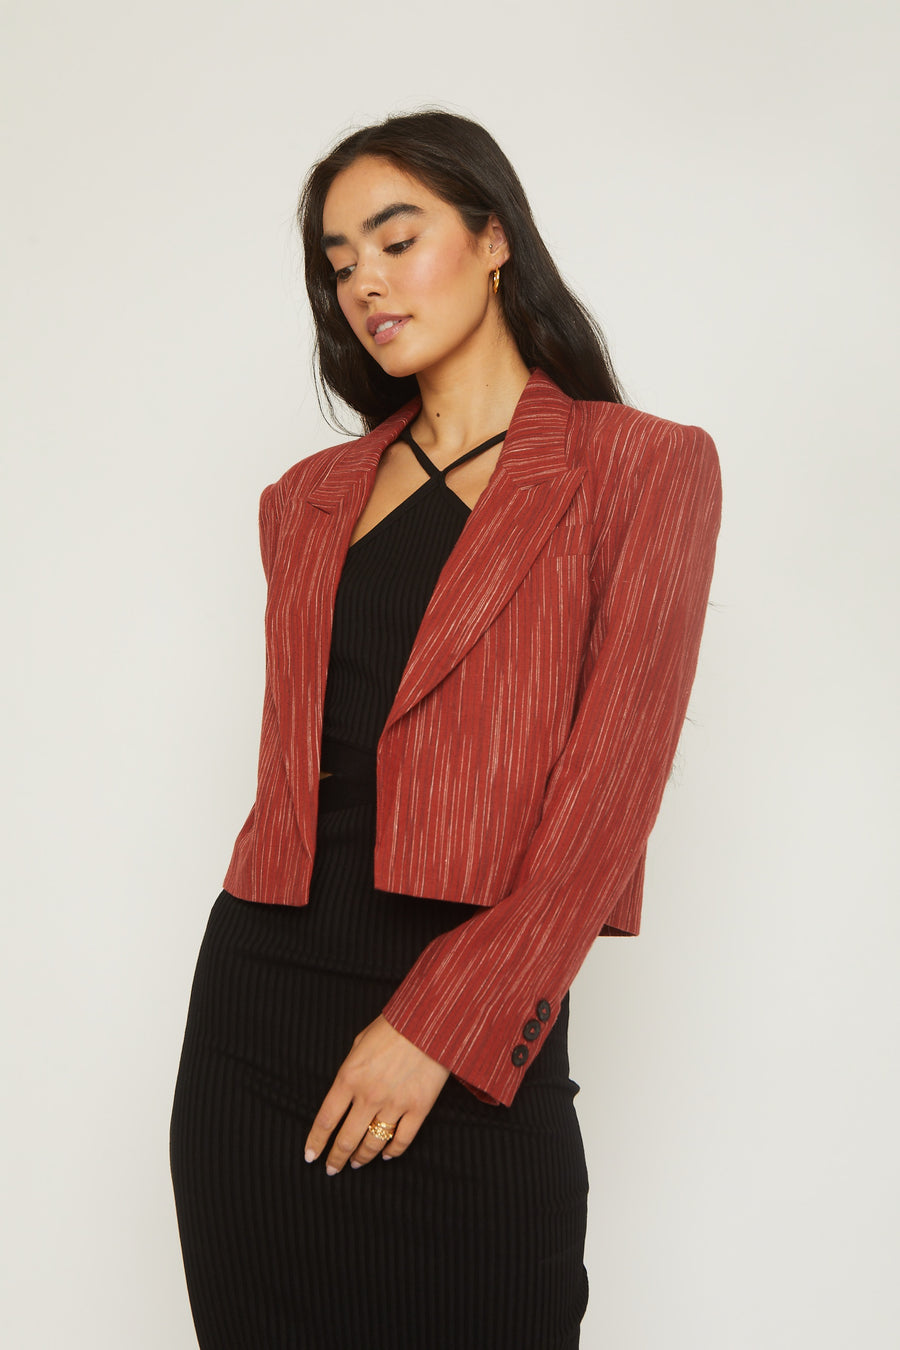 No Srcipt image - Images of 1 of 6 Cropped Dried Rose Red Blazer Jacket Lapel Collar Spring Summer Style Bright Red Sexy Cropped Jacket Womens Style Workwear Office Wear Elevated Outerwear Sophisticated Chic